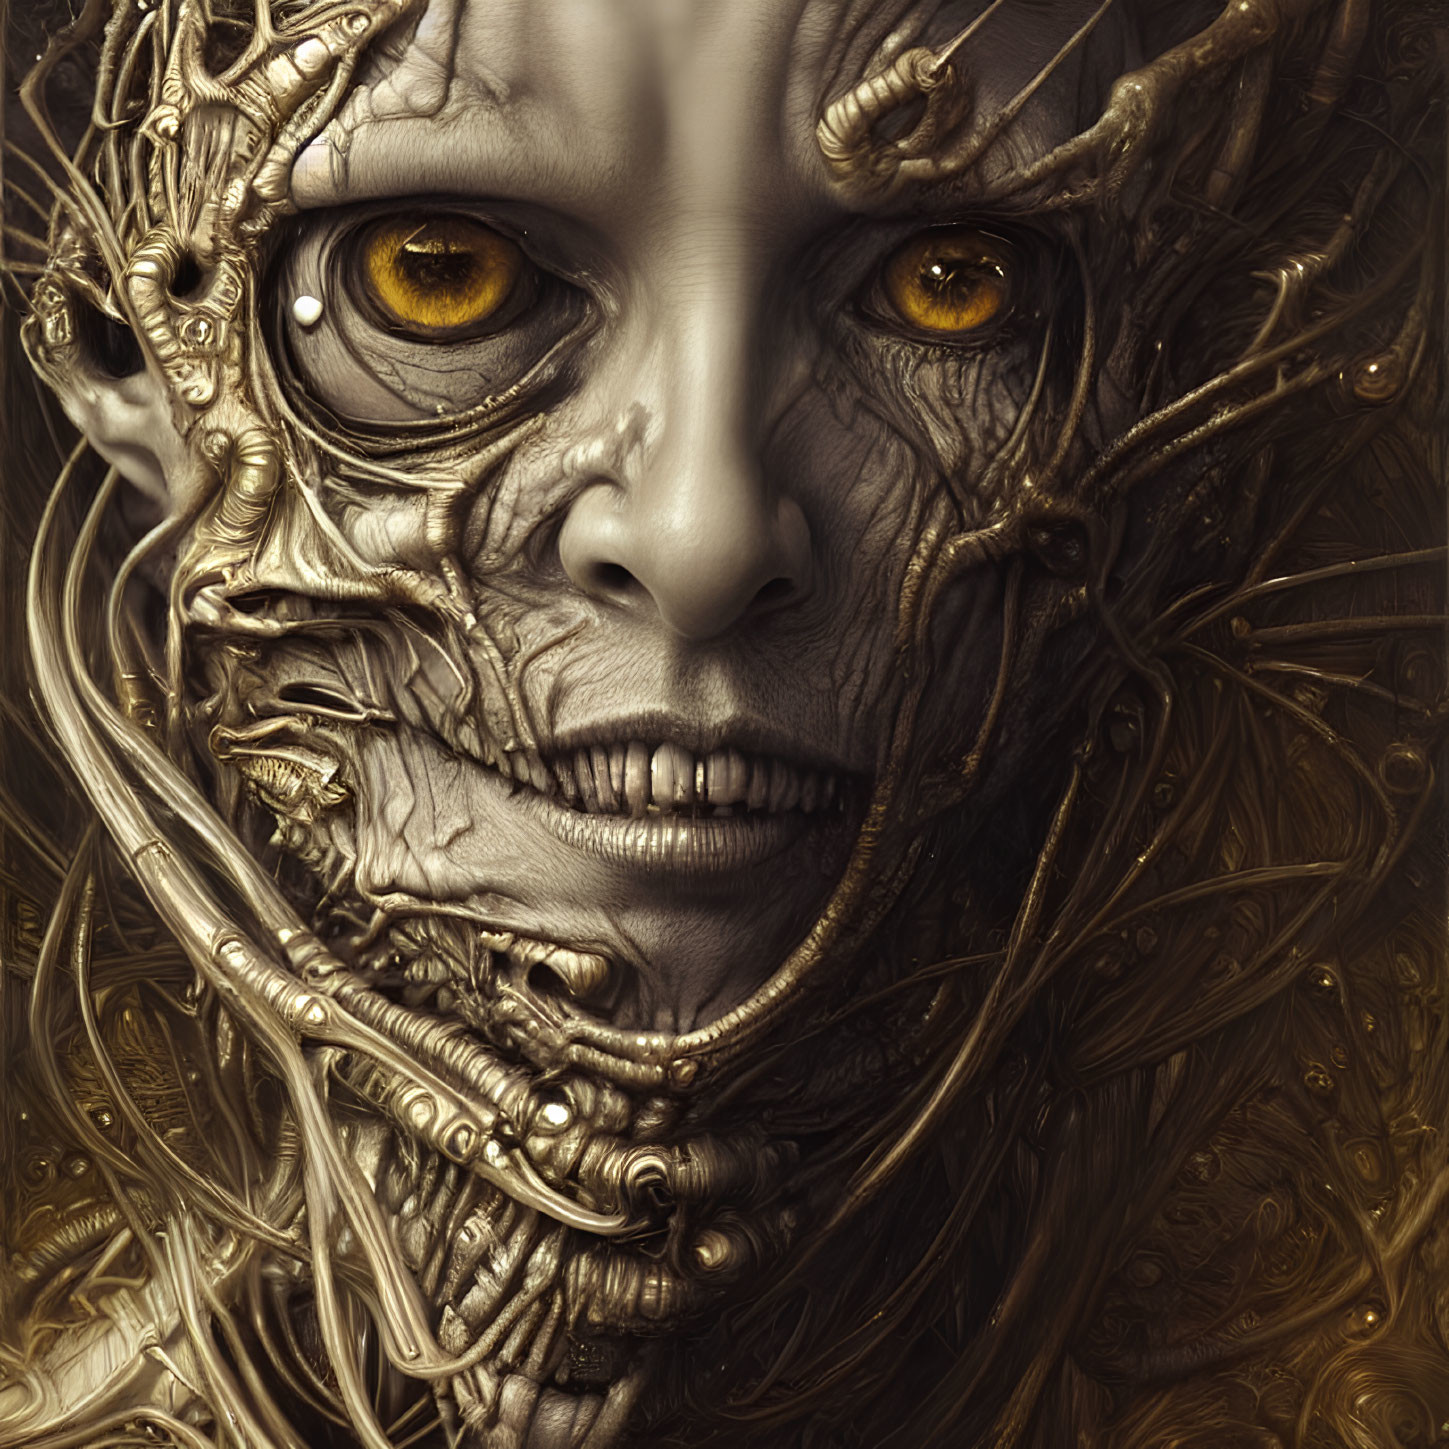 Detailed Illustration: Fantastical Being with Golden Eyes & Intertwined Mechanical & Organic Features